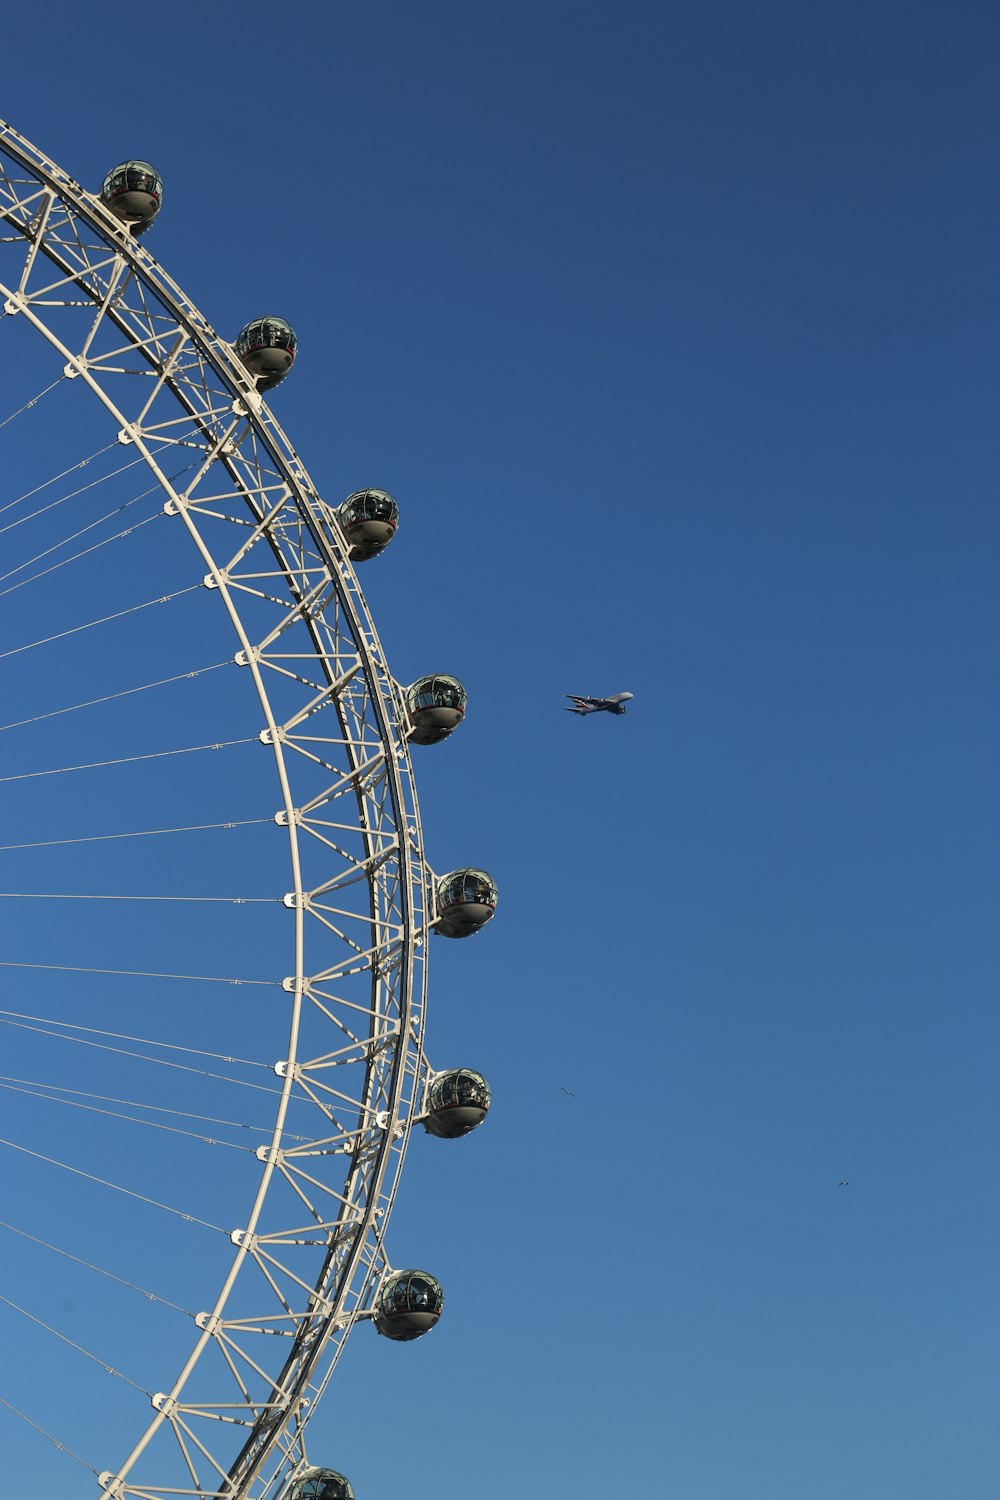 a large ferris wheel sitting next to a blue sky